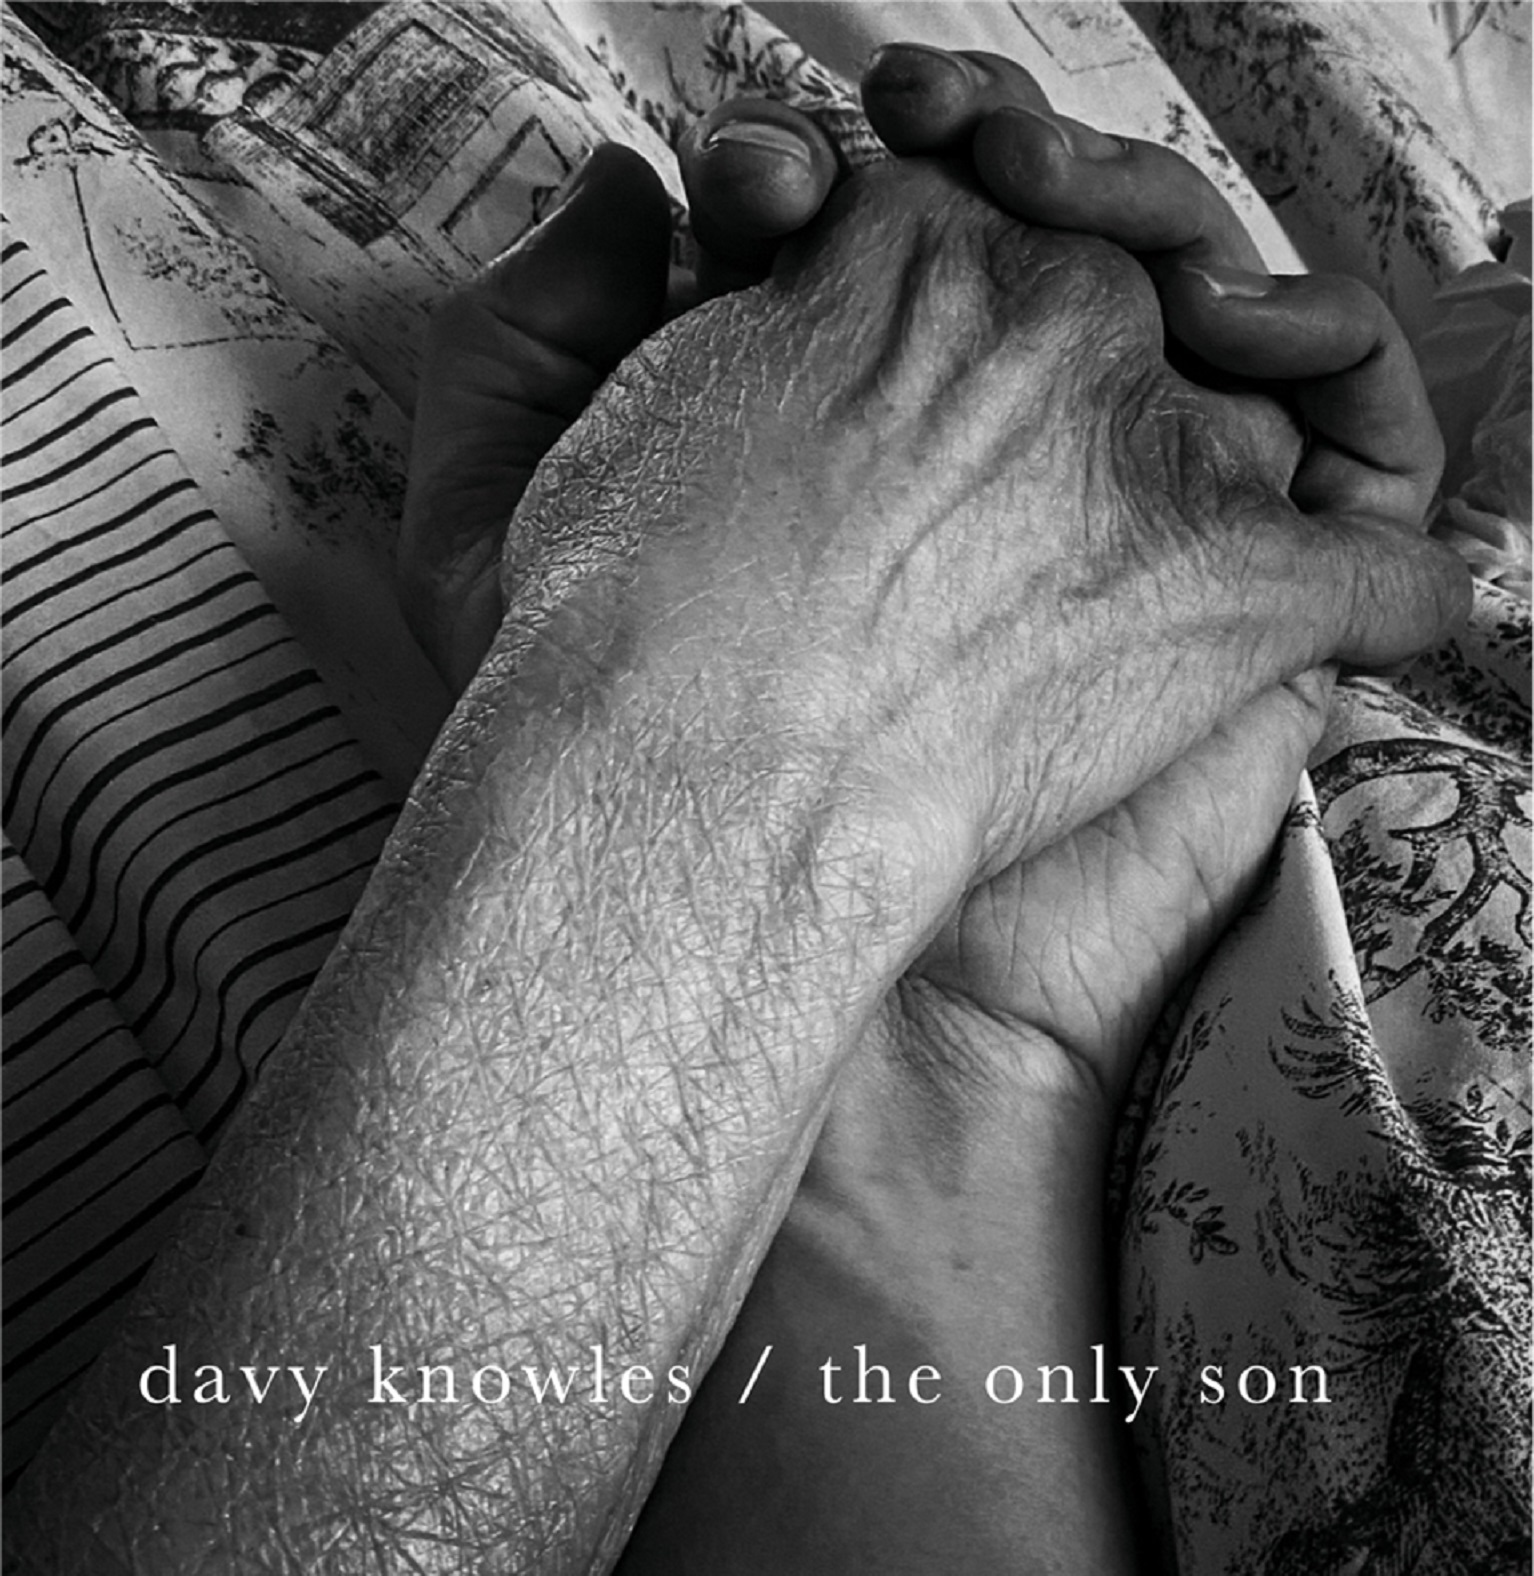 Davy Knowles If I Should Wander out August 25th New single “The Only Son” out today!